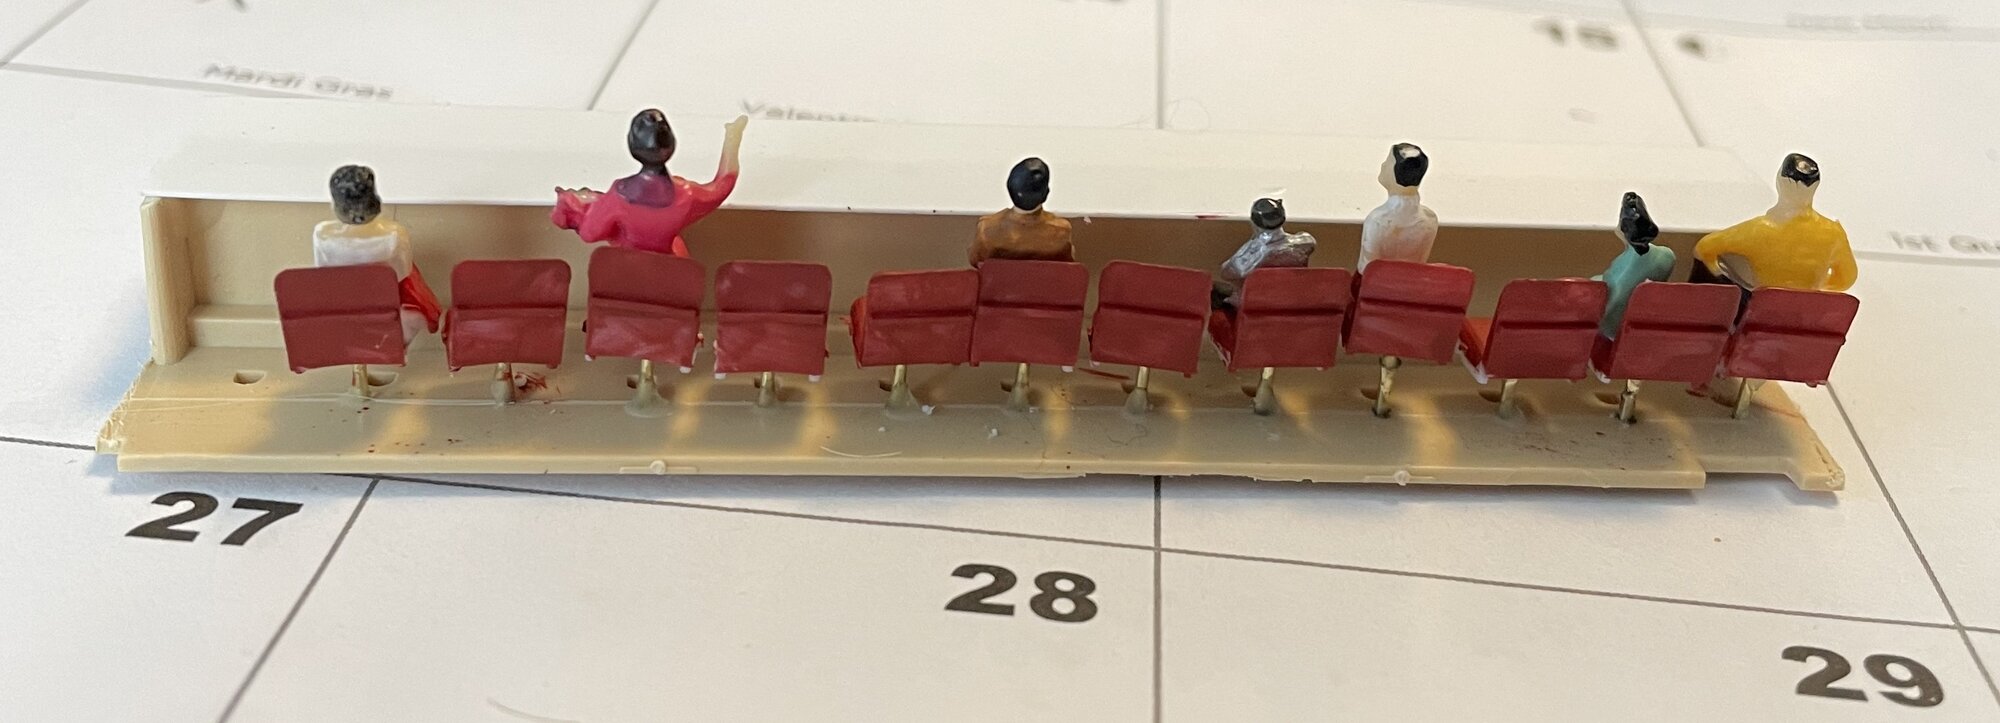 Lunch Counter build 4.jpg